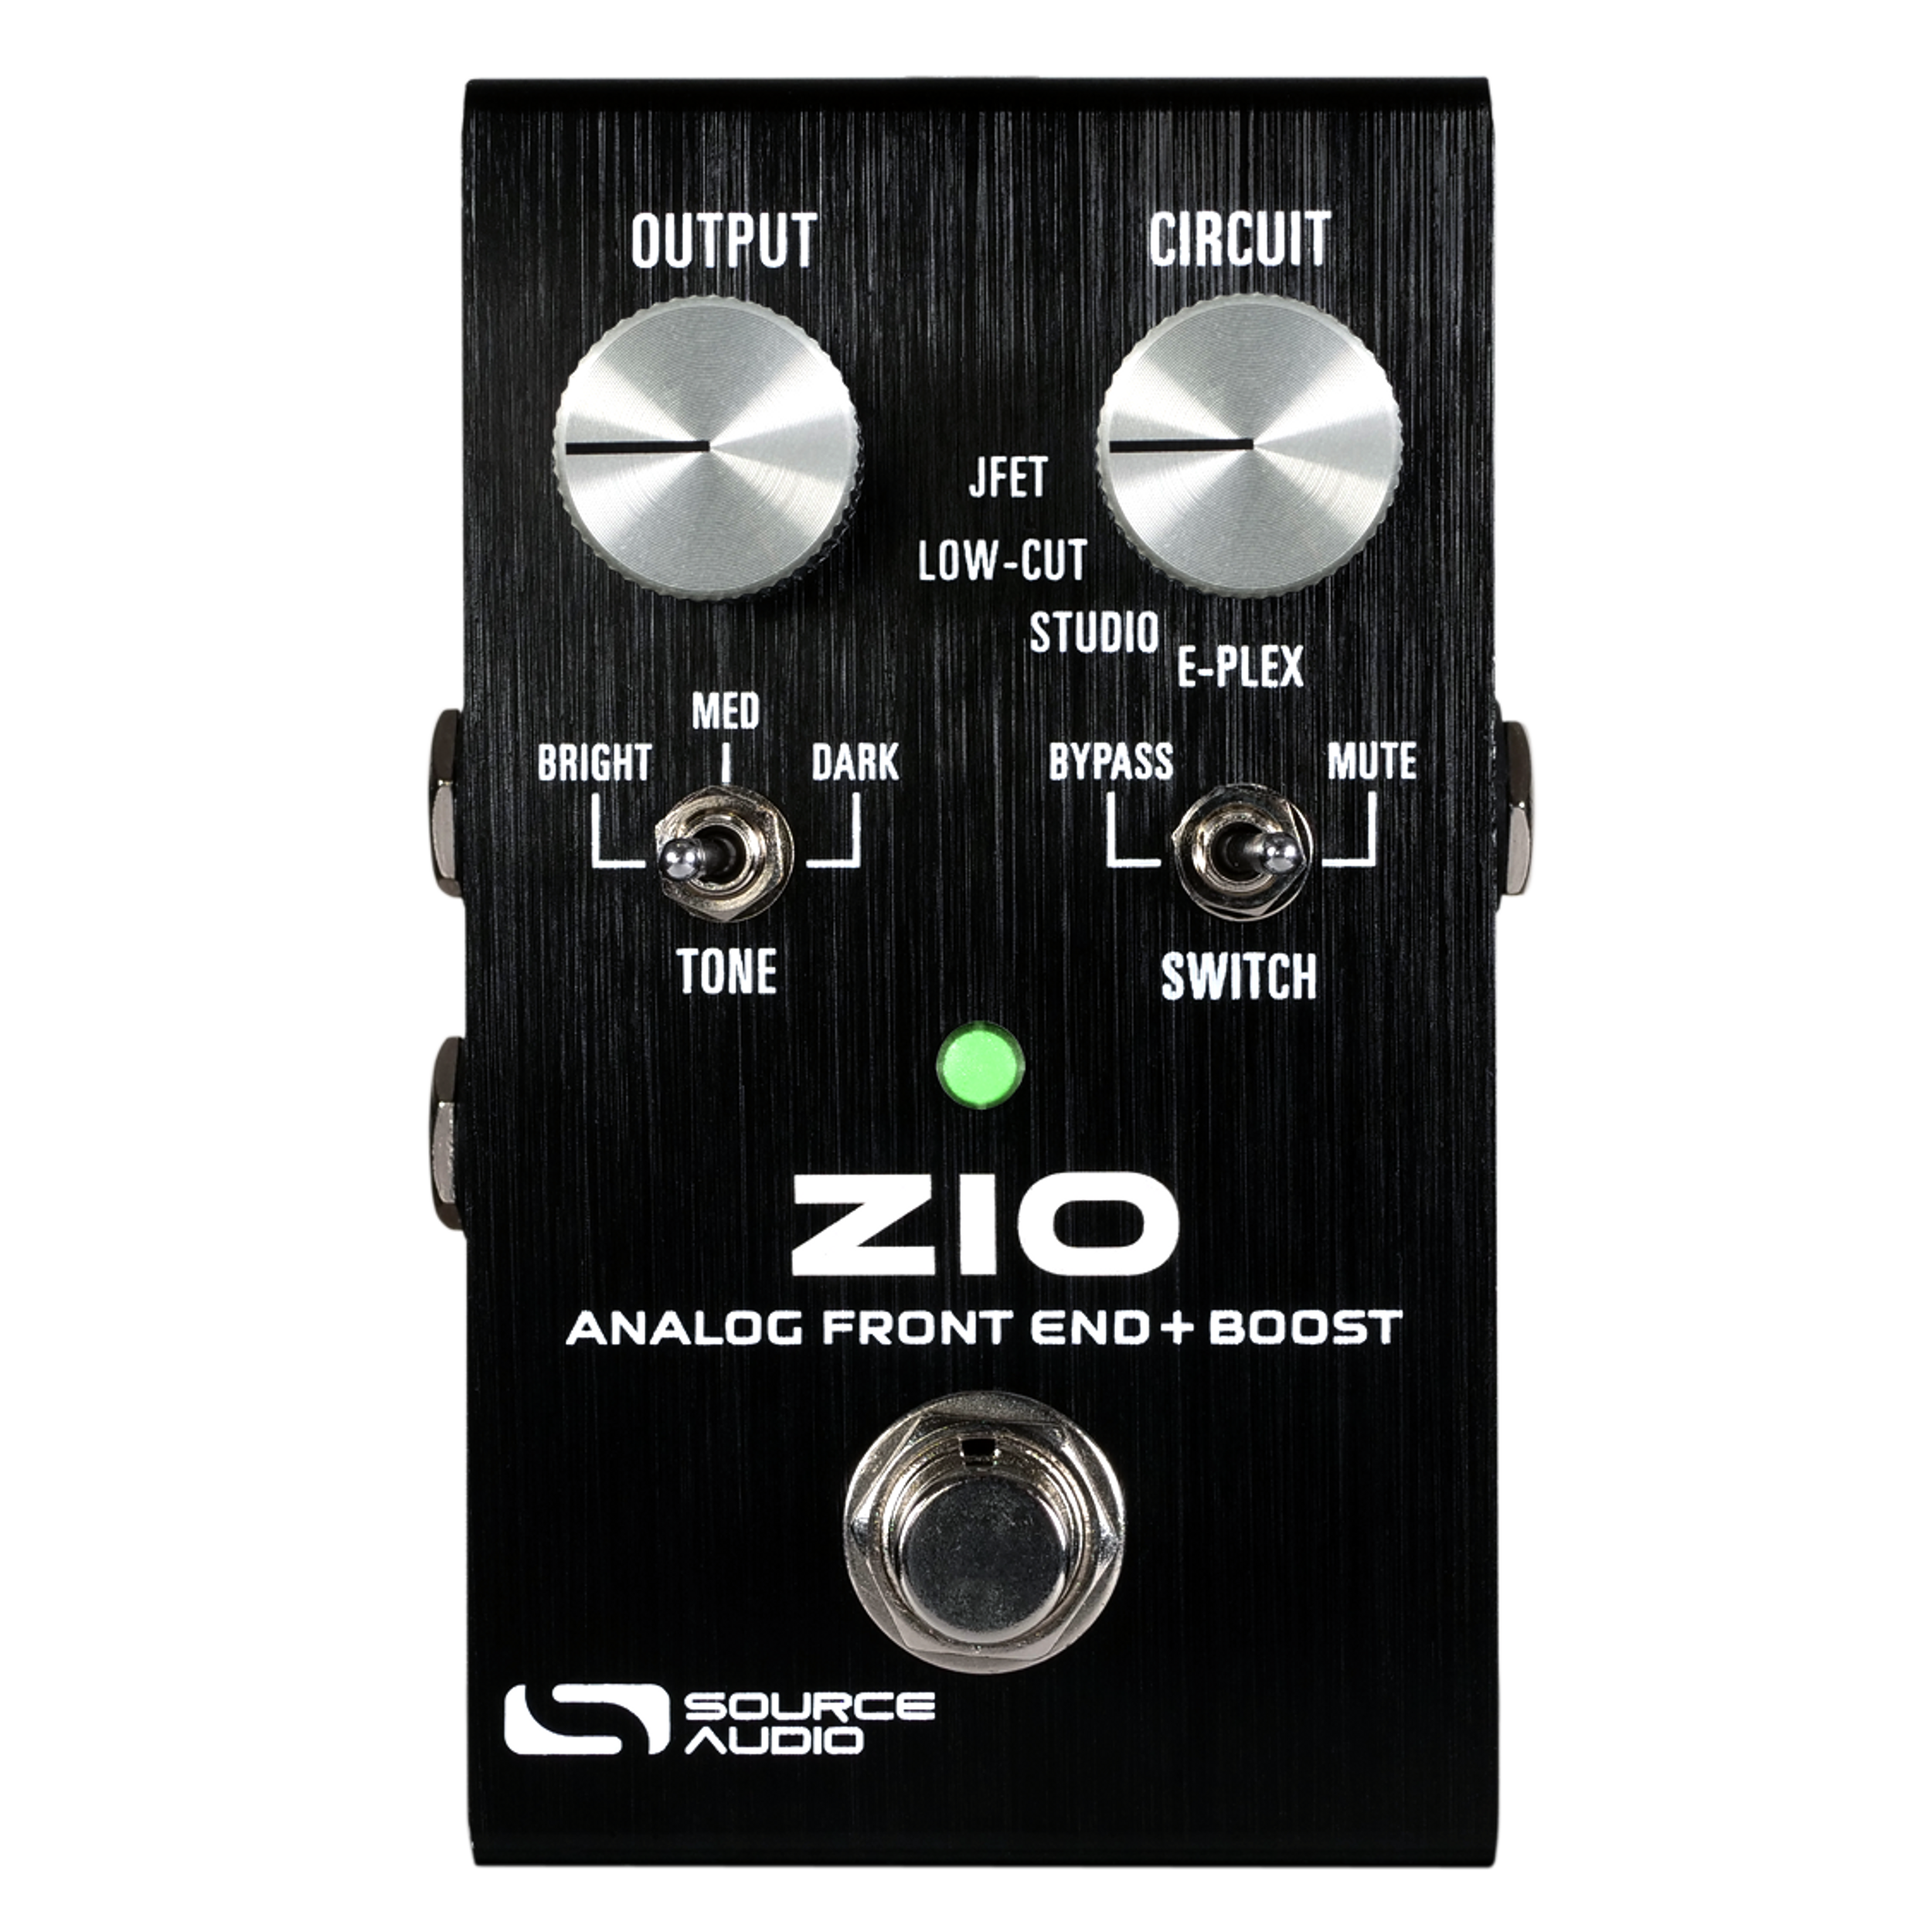 Source Audio Releases the ZIO Analog Front End + Boost